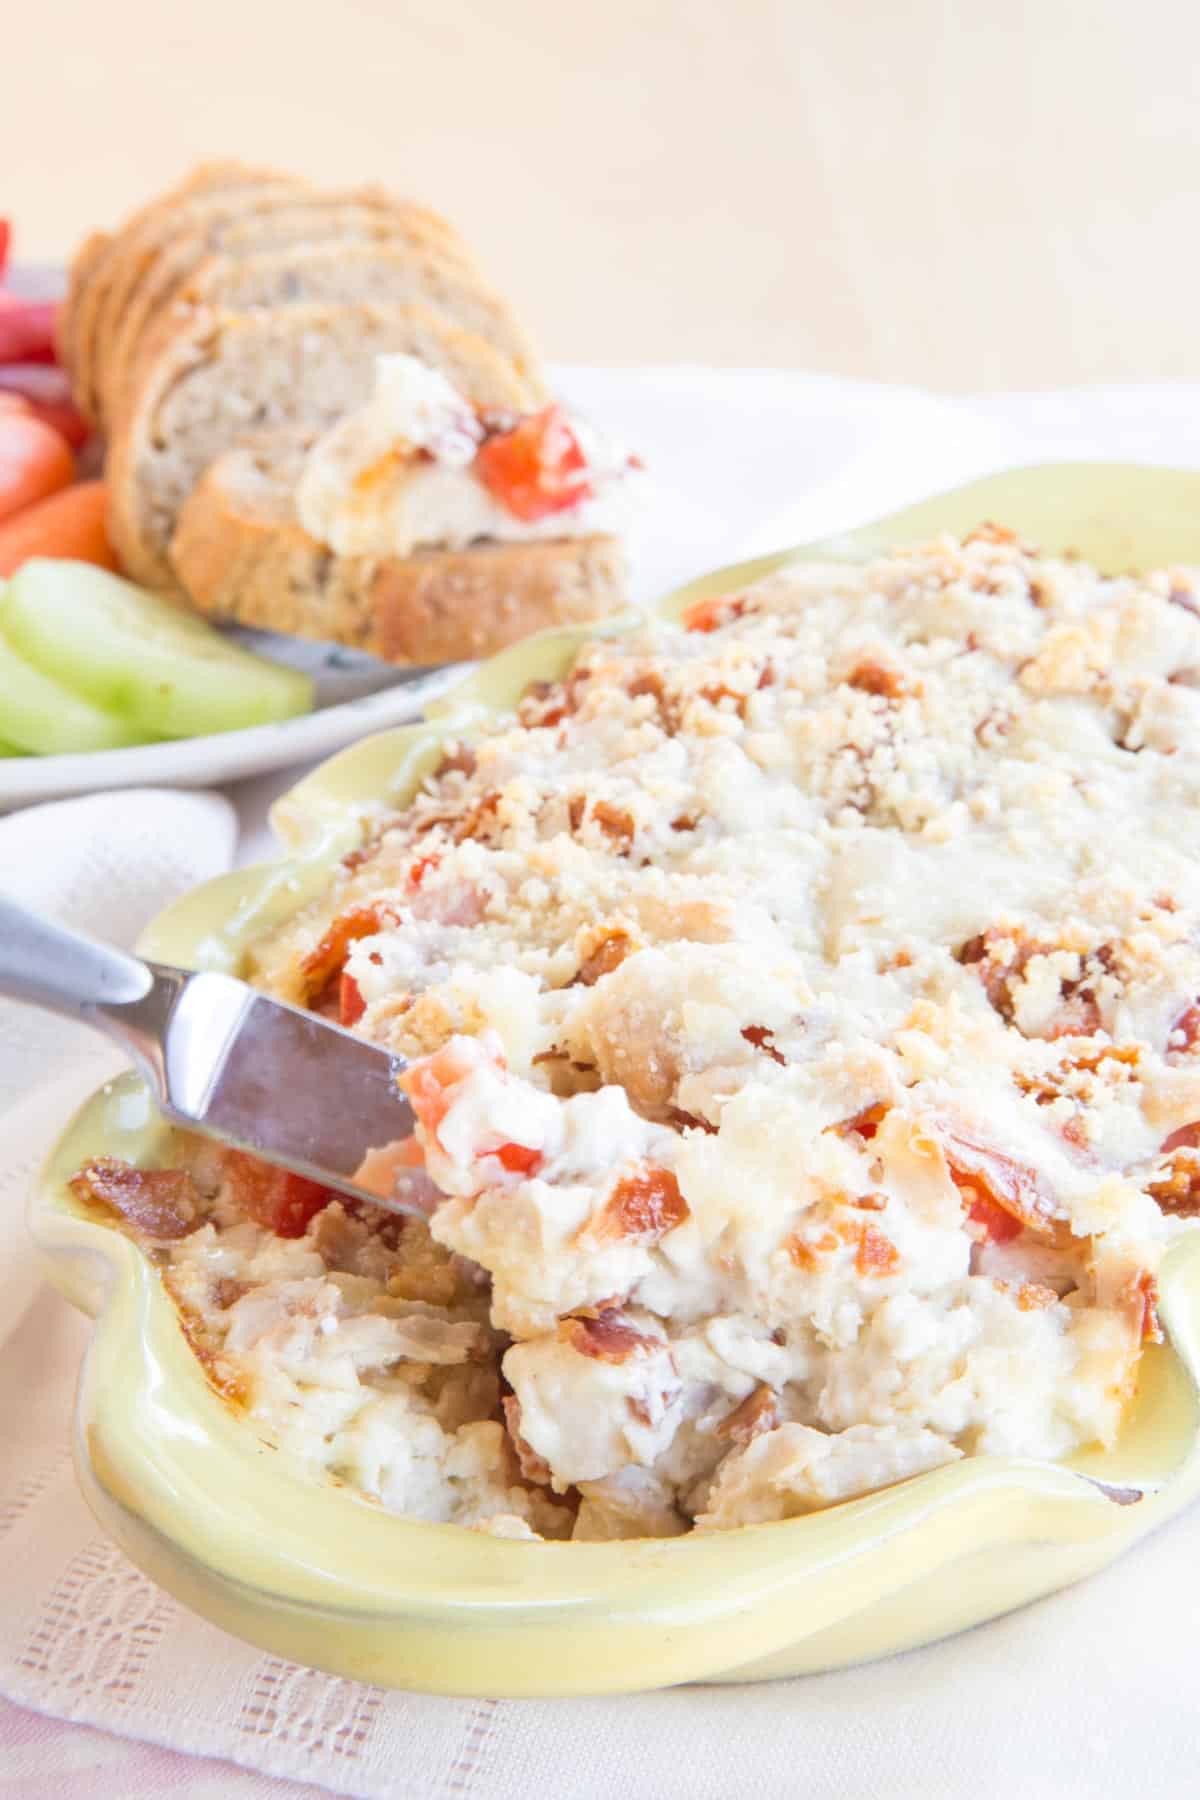 Kentucky Hot Brown Dip - one of the Top 10 Most Popular Savory Recipes of 2015 on cupcakesandkalechips.com